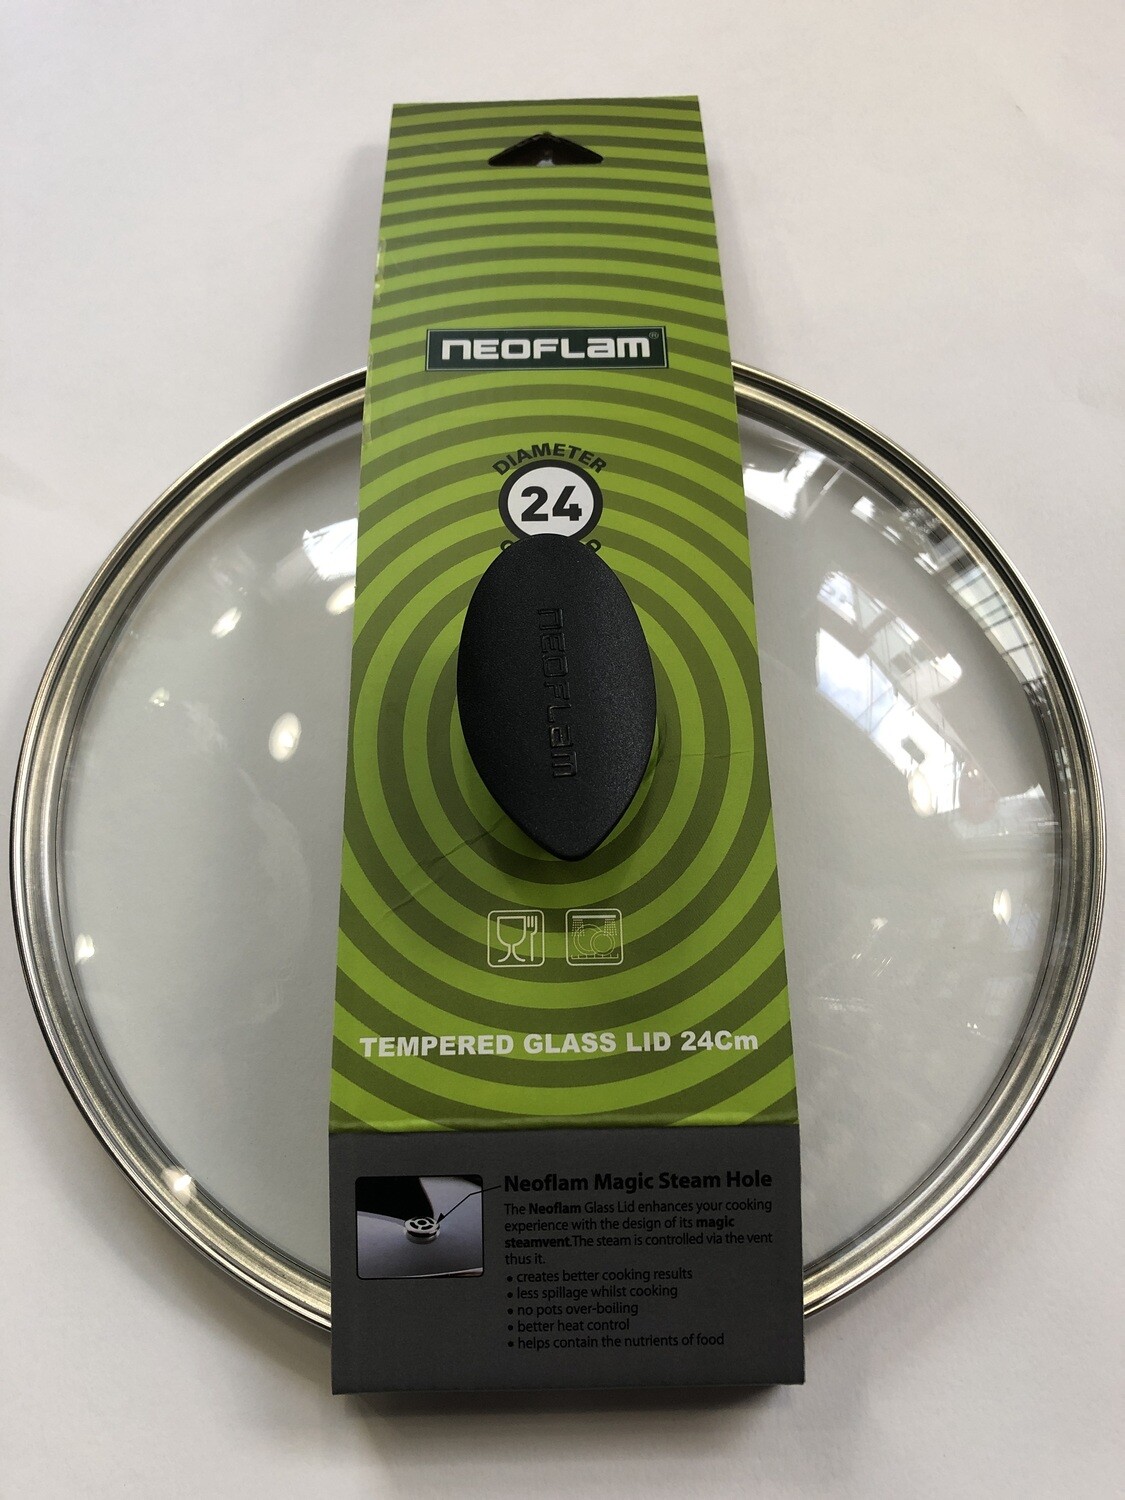 NEOFLAM - Tempered Glass Lid 24cm